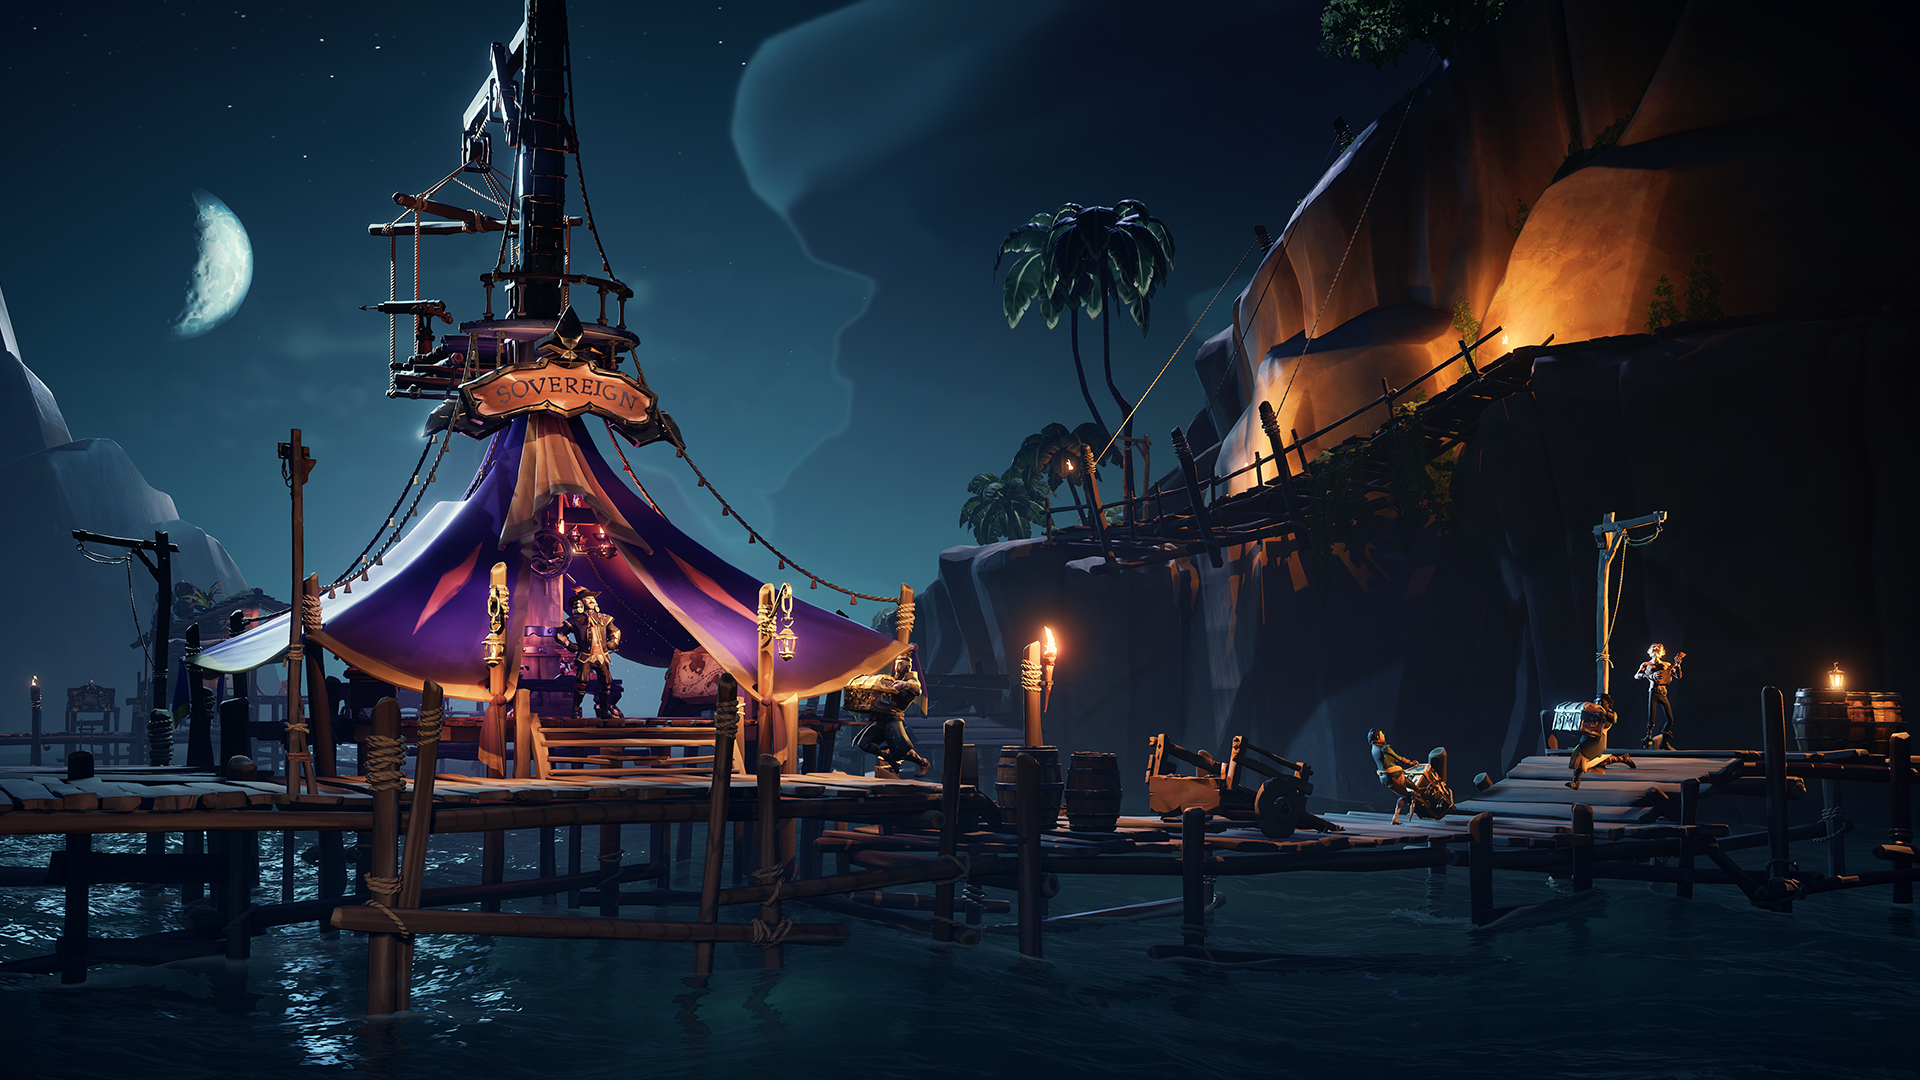 Sail as Captains of Adventure in Sea of Thieves Season Seven